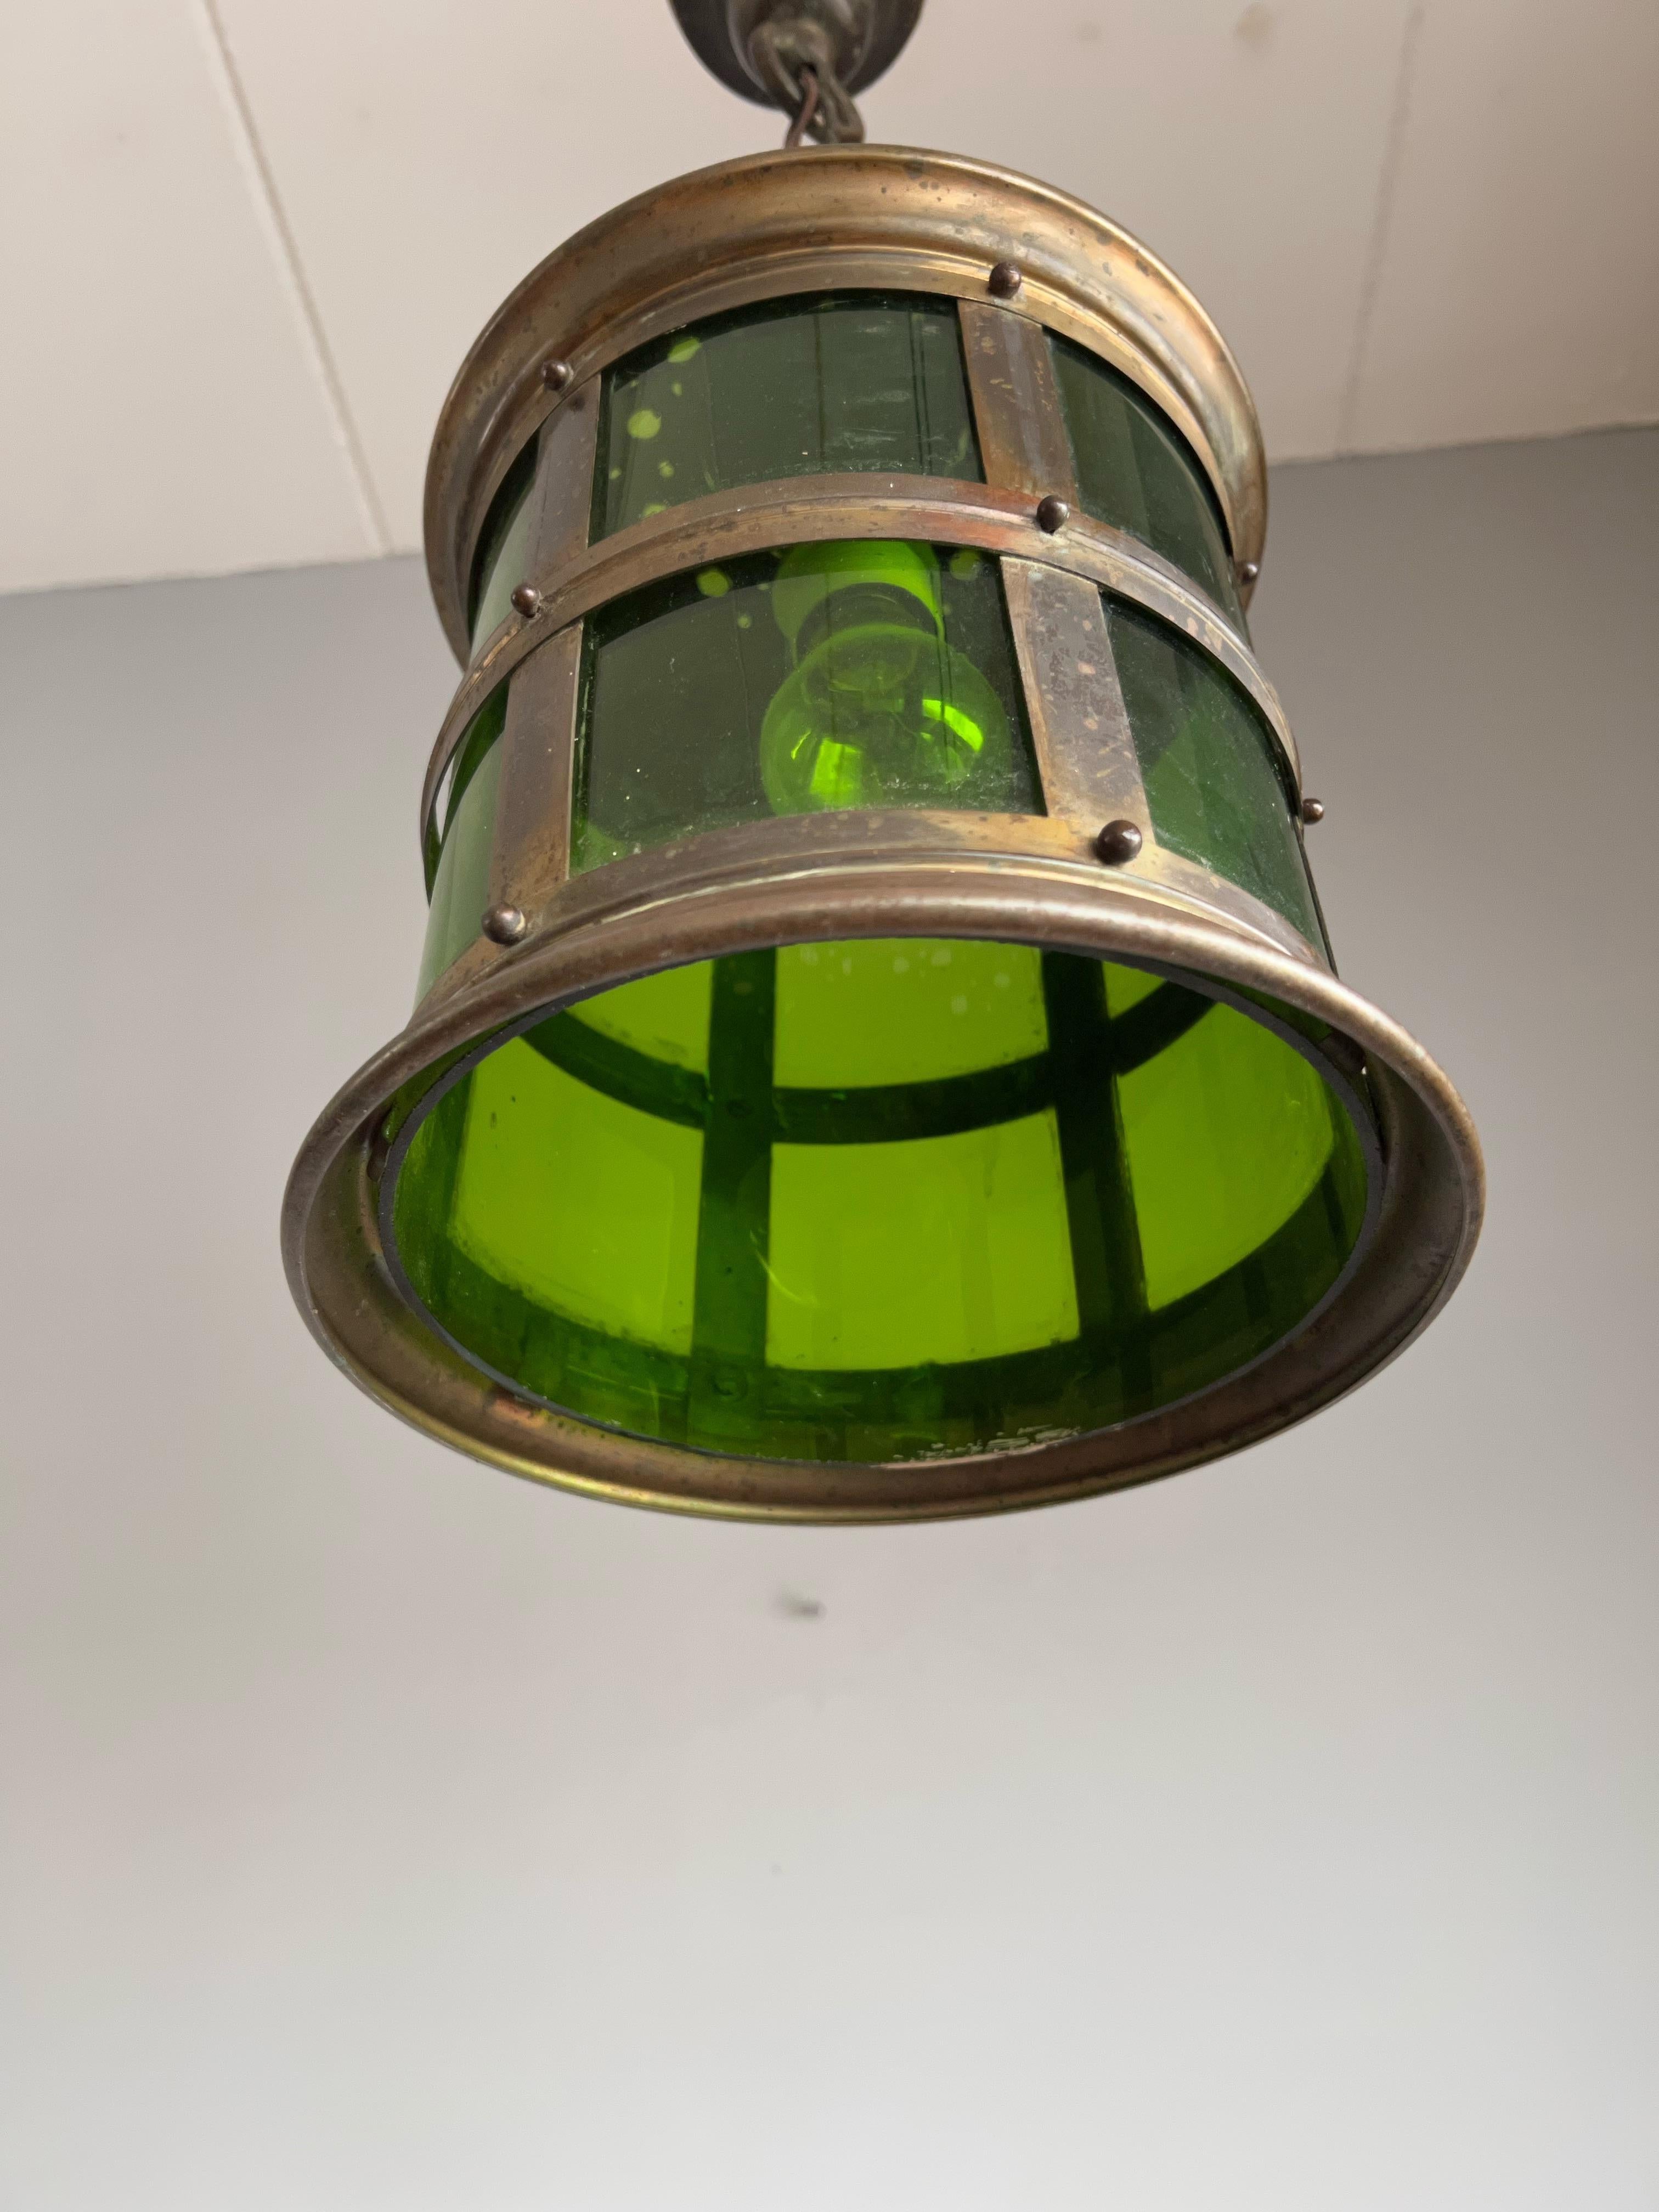 Arts & Crafts Handcrafted Copper & Green Stained Glass Circular Pendant Lantern In Excellent Condition For Sale In Lisse, NL